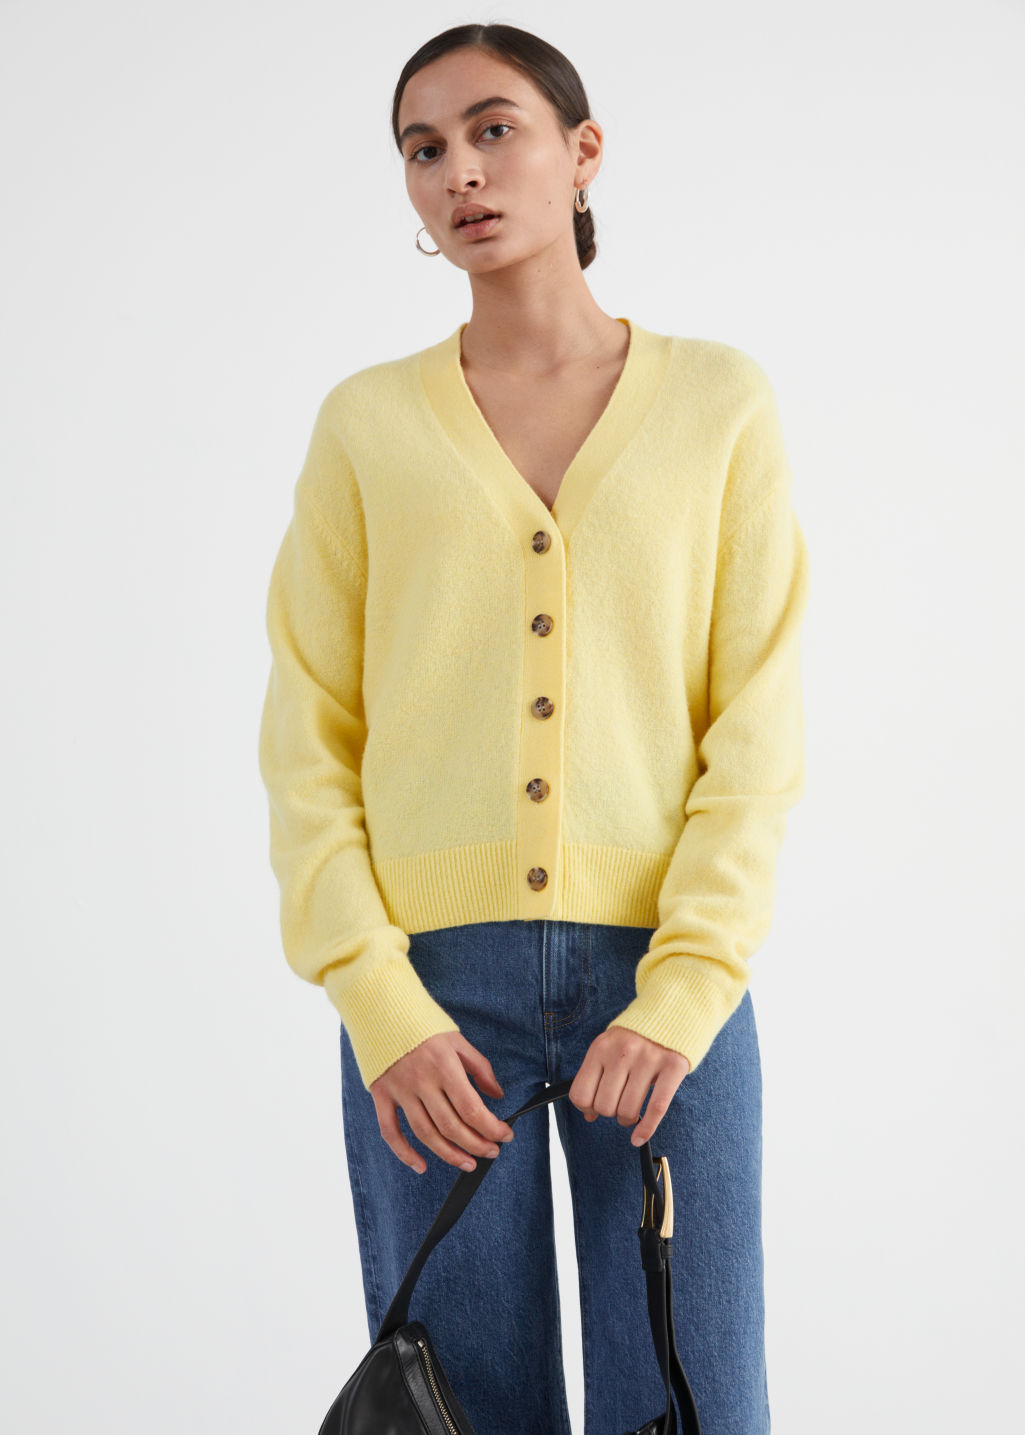 Wool Blend Knit Cardigan - Yellow - Cardigans - & Other Stories